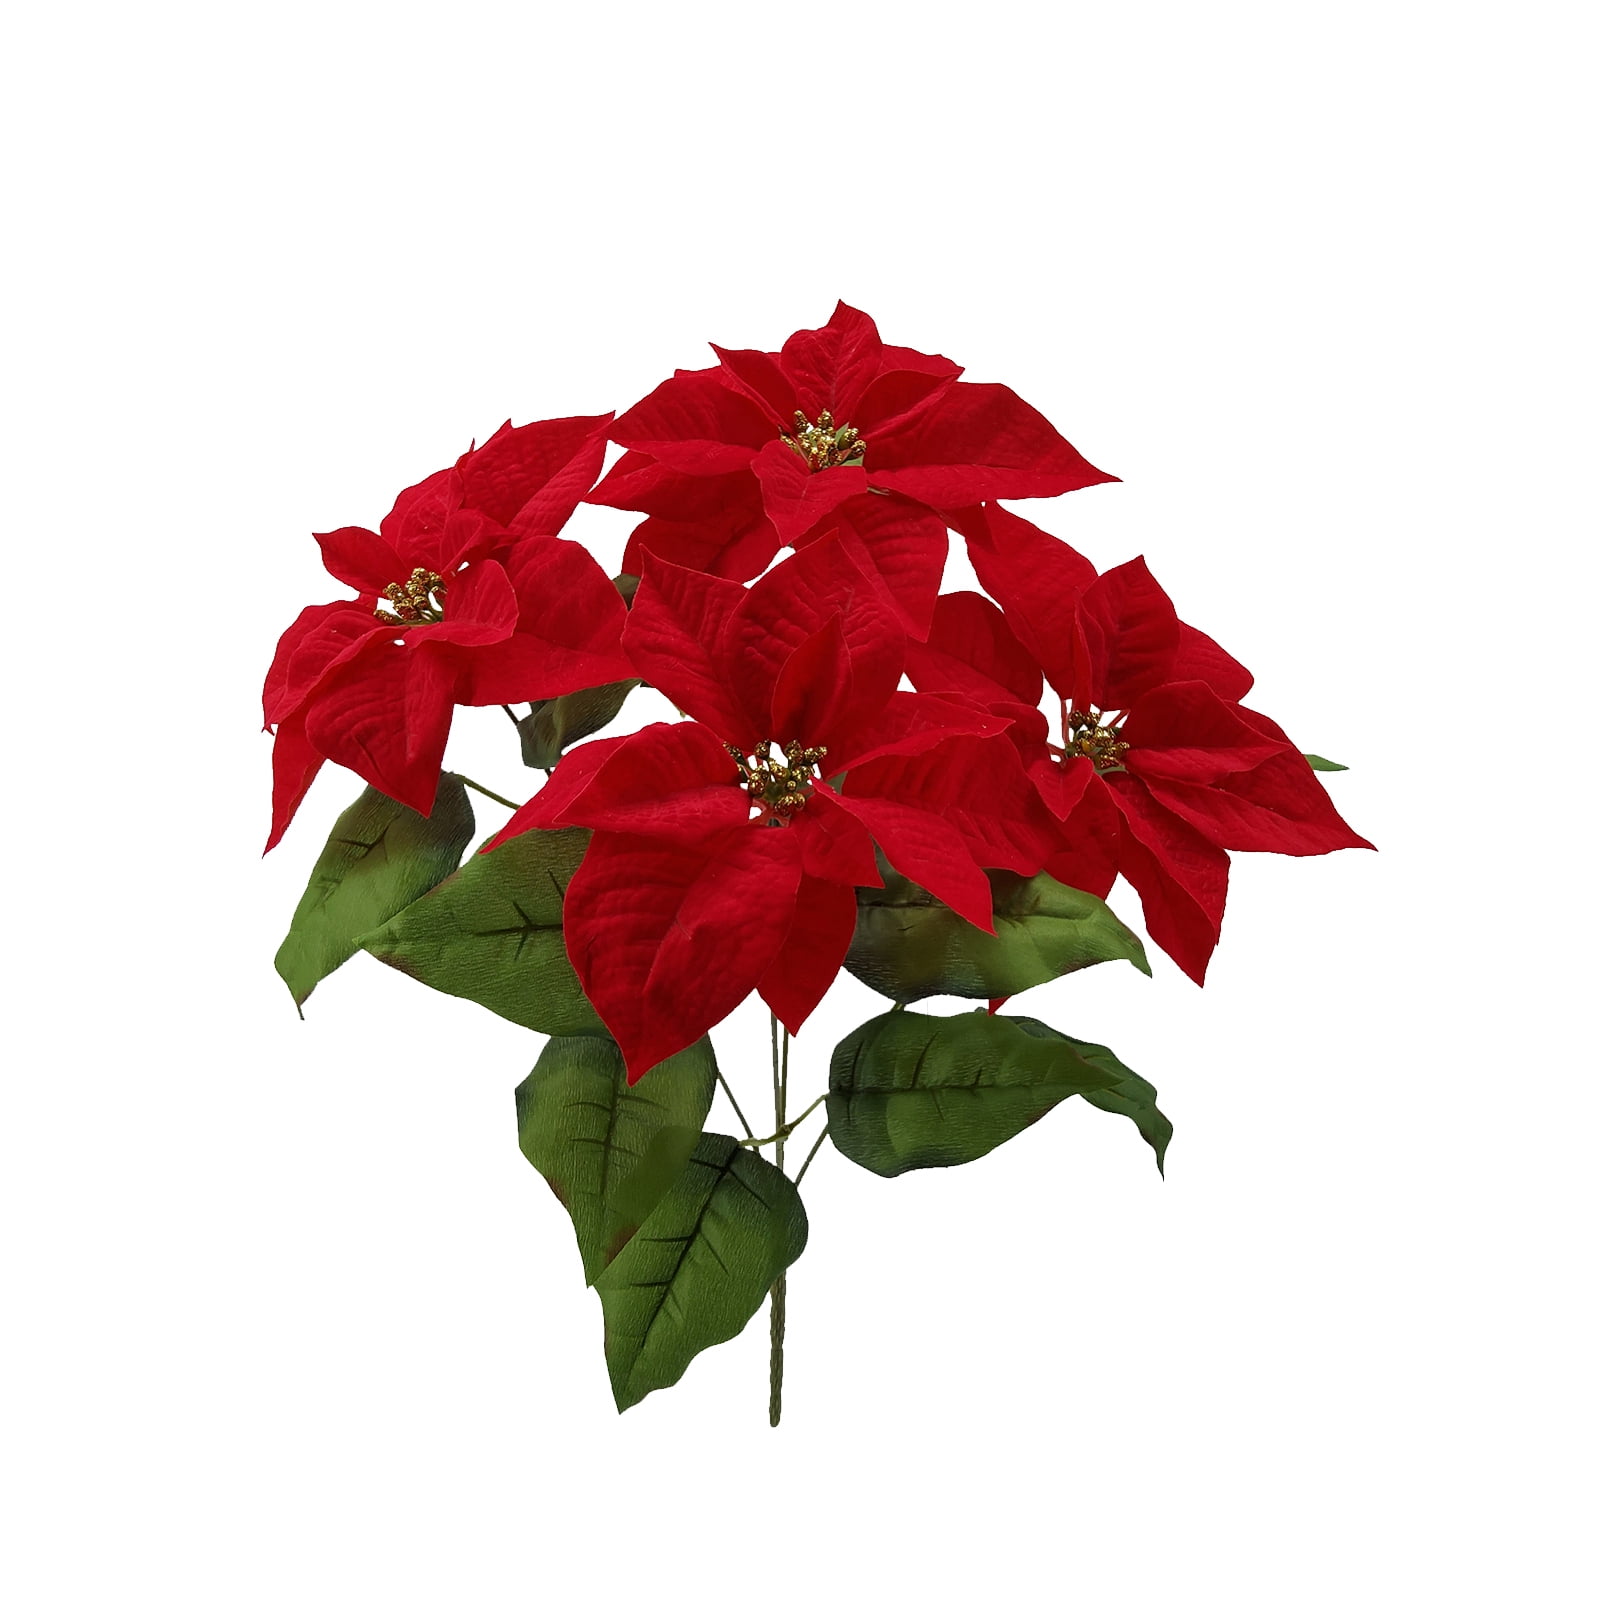 Mainstays Red Poinsettia With Leaves Bush